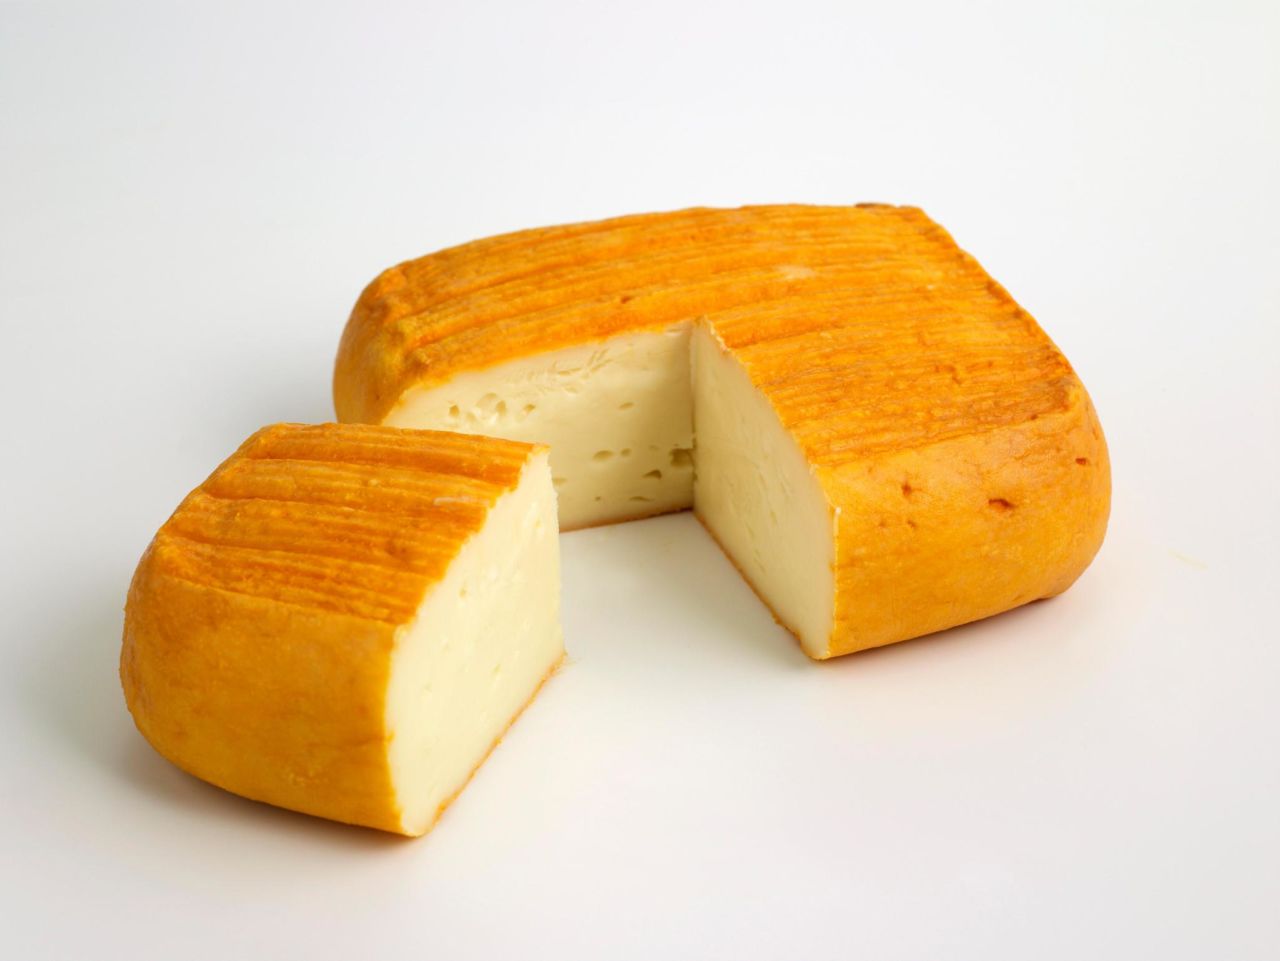 <strong>The future is orange:</strong> Vieux-Boulogne is the stinkiest cheese in the world.